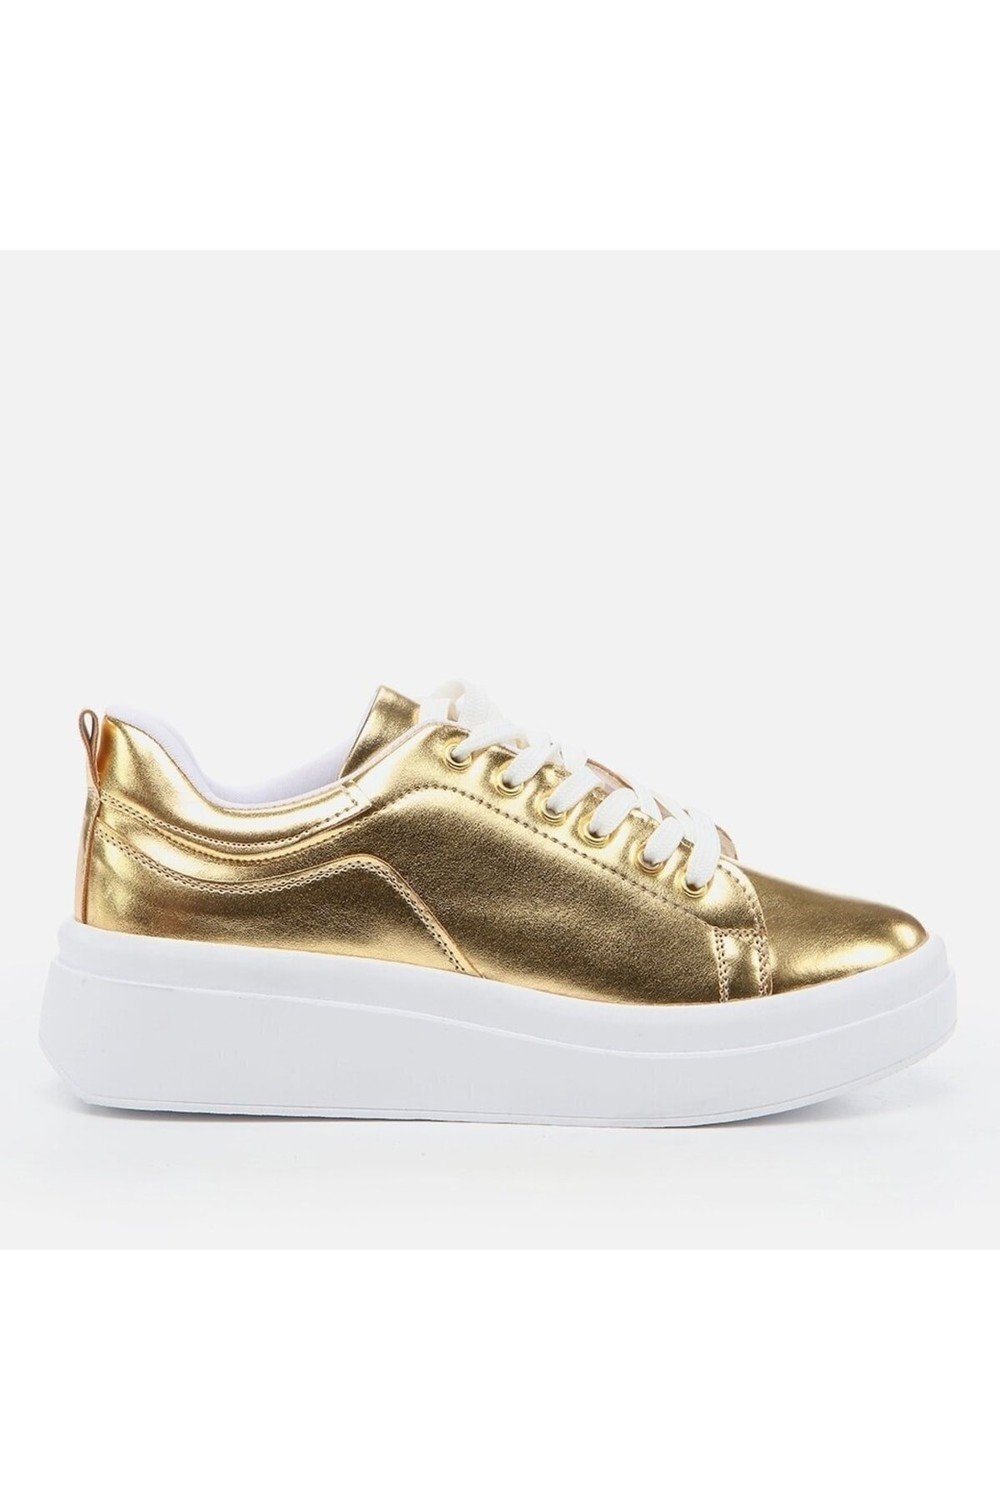 Yaya by Hotiç Sneakers - Gold-colored - Flat